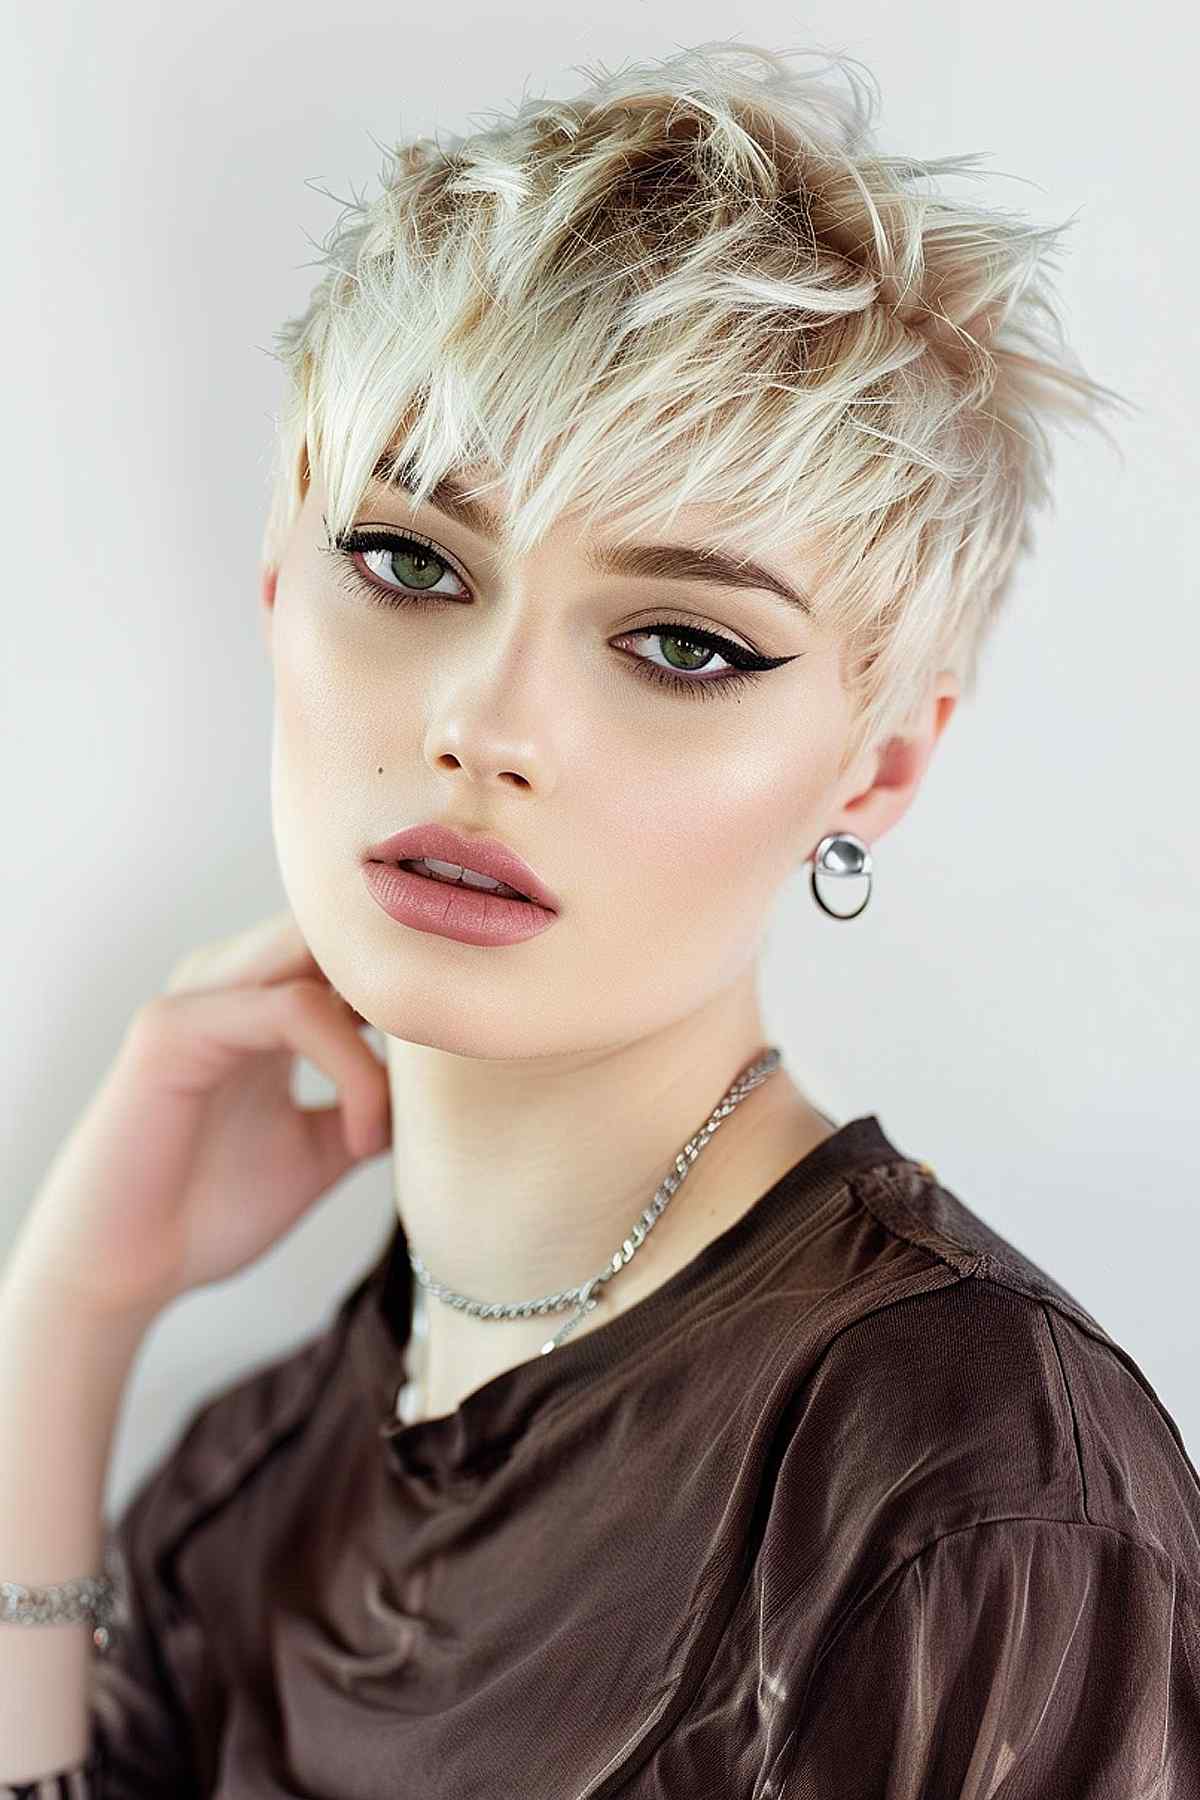 Short punk pixie cut with dramatic bangs in platinum blonde, showcasing a layered style that adds volume and a bold yet feminine look.